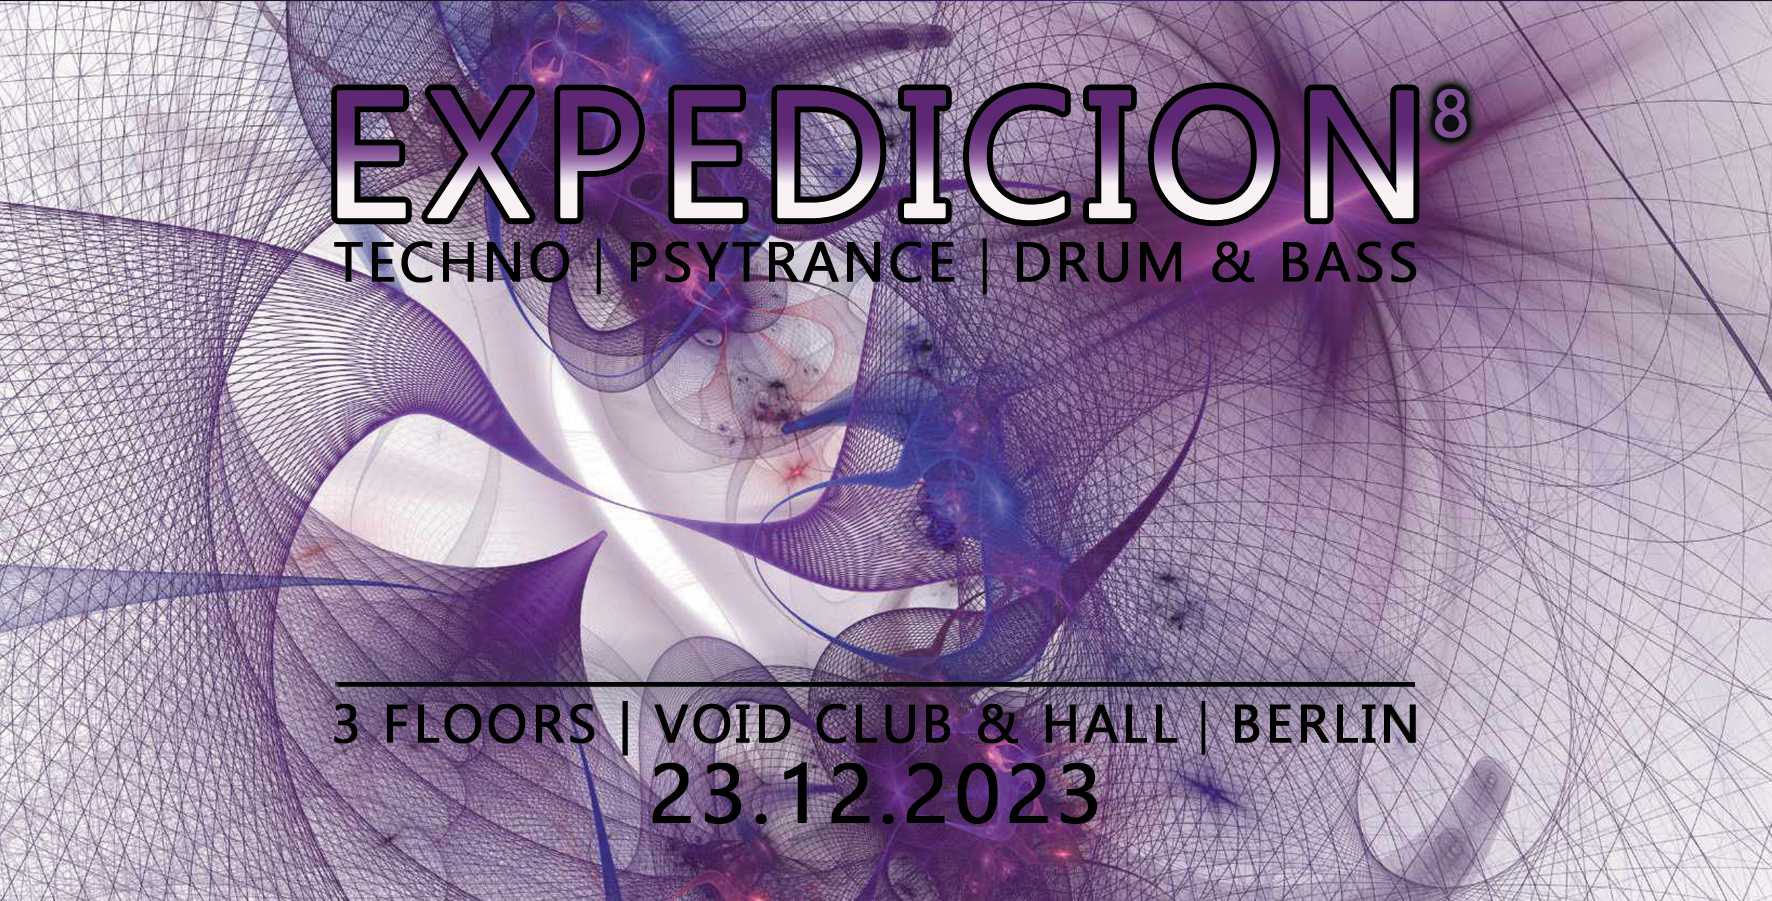 Abandoned Ground 11 w/ Millbrook, Viper XXL at VOID Club & Hall in